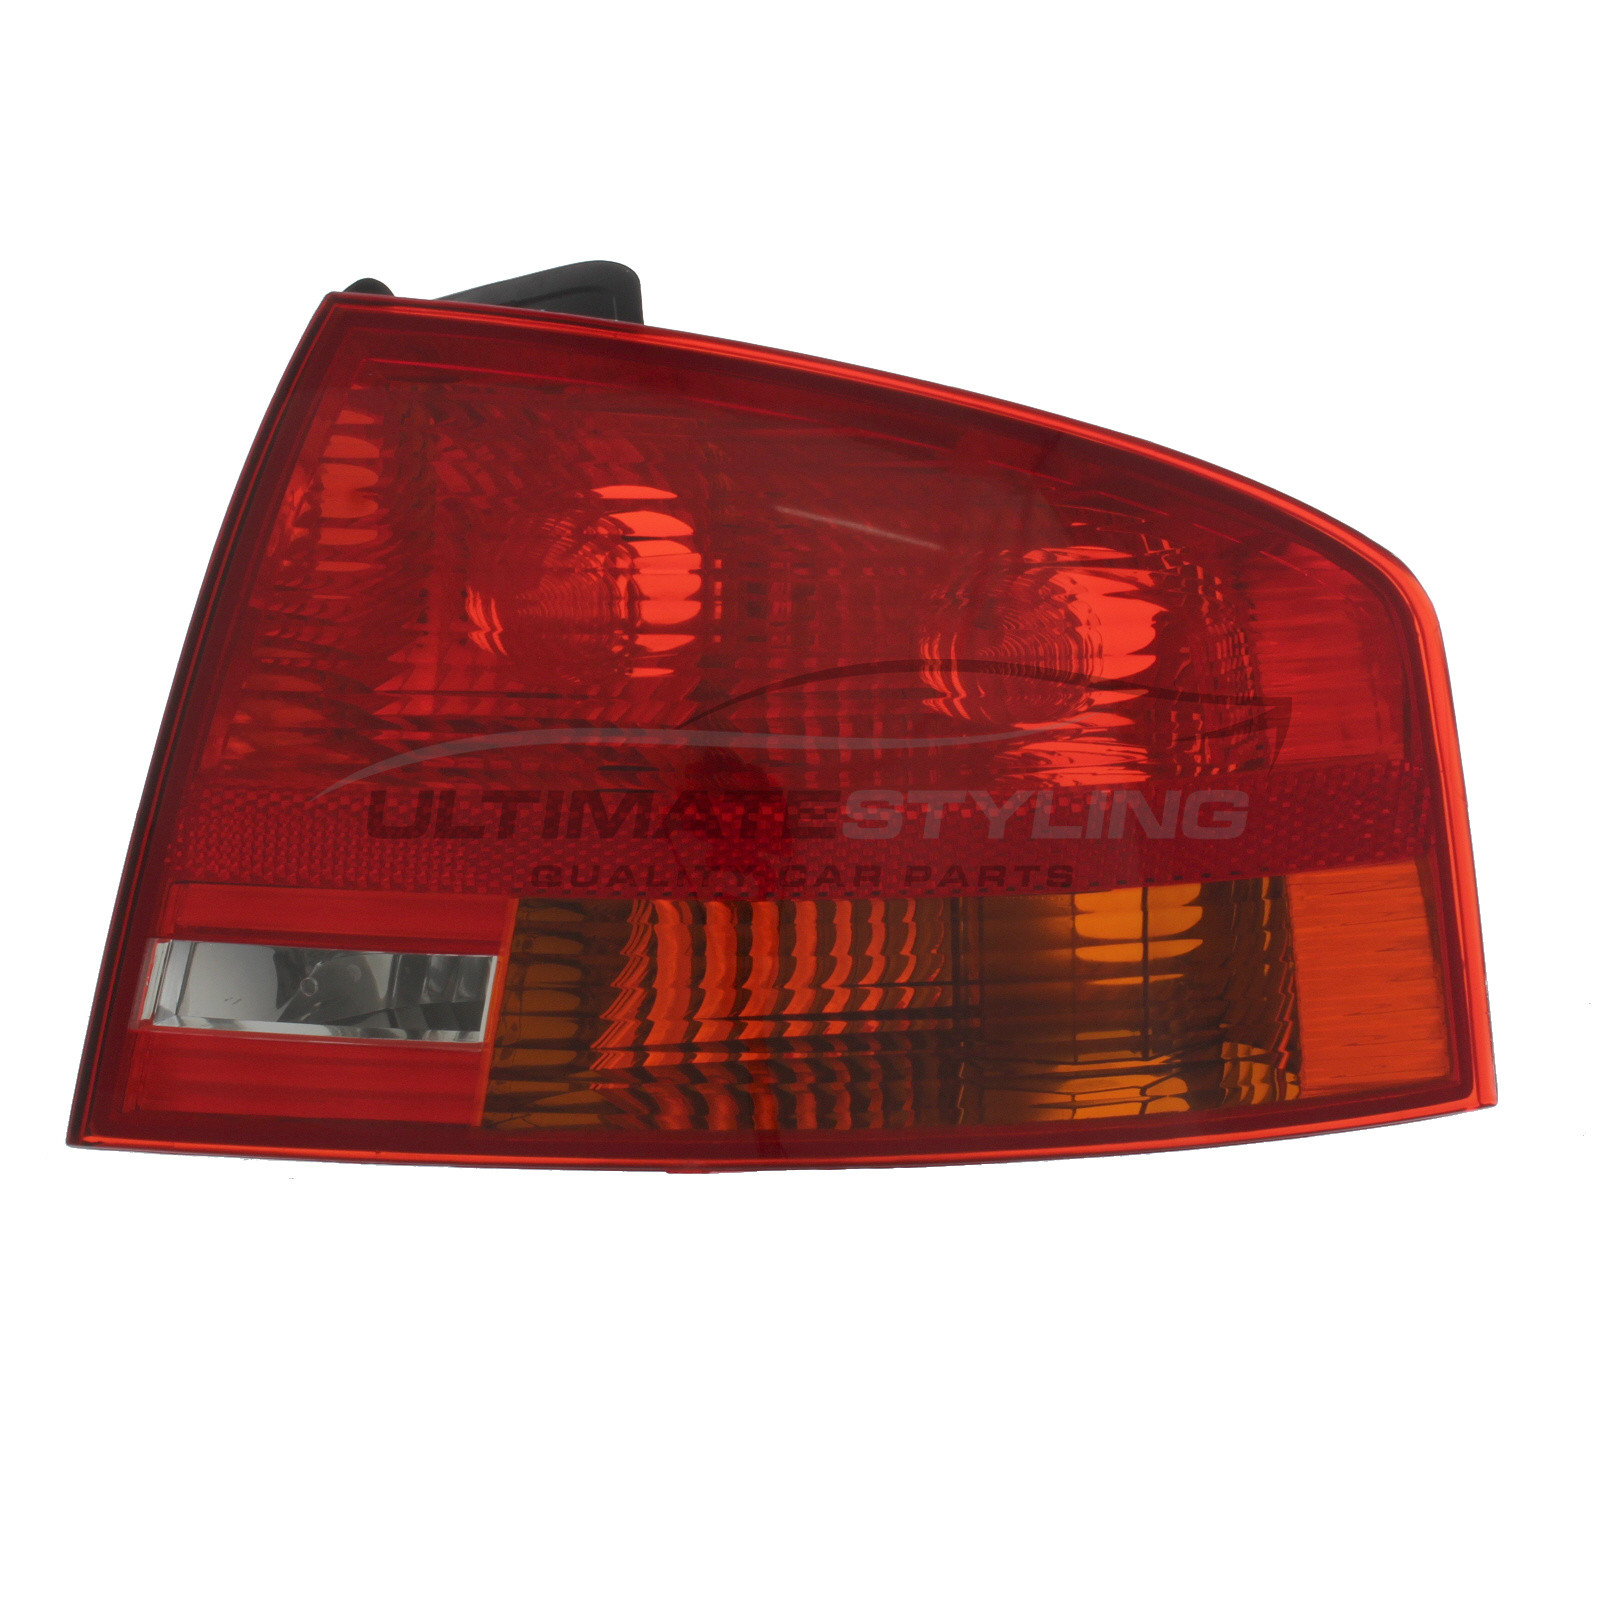 Audi A4 2004-2008 / Audi RS4 2005-2007 / Audi S4 2004-2008 Non-LED Outer (Wing) Rear Light / Tail Light Excluding Bulb Holder Drivers Side (RH)